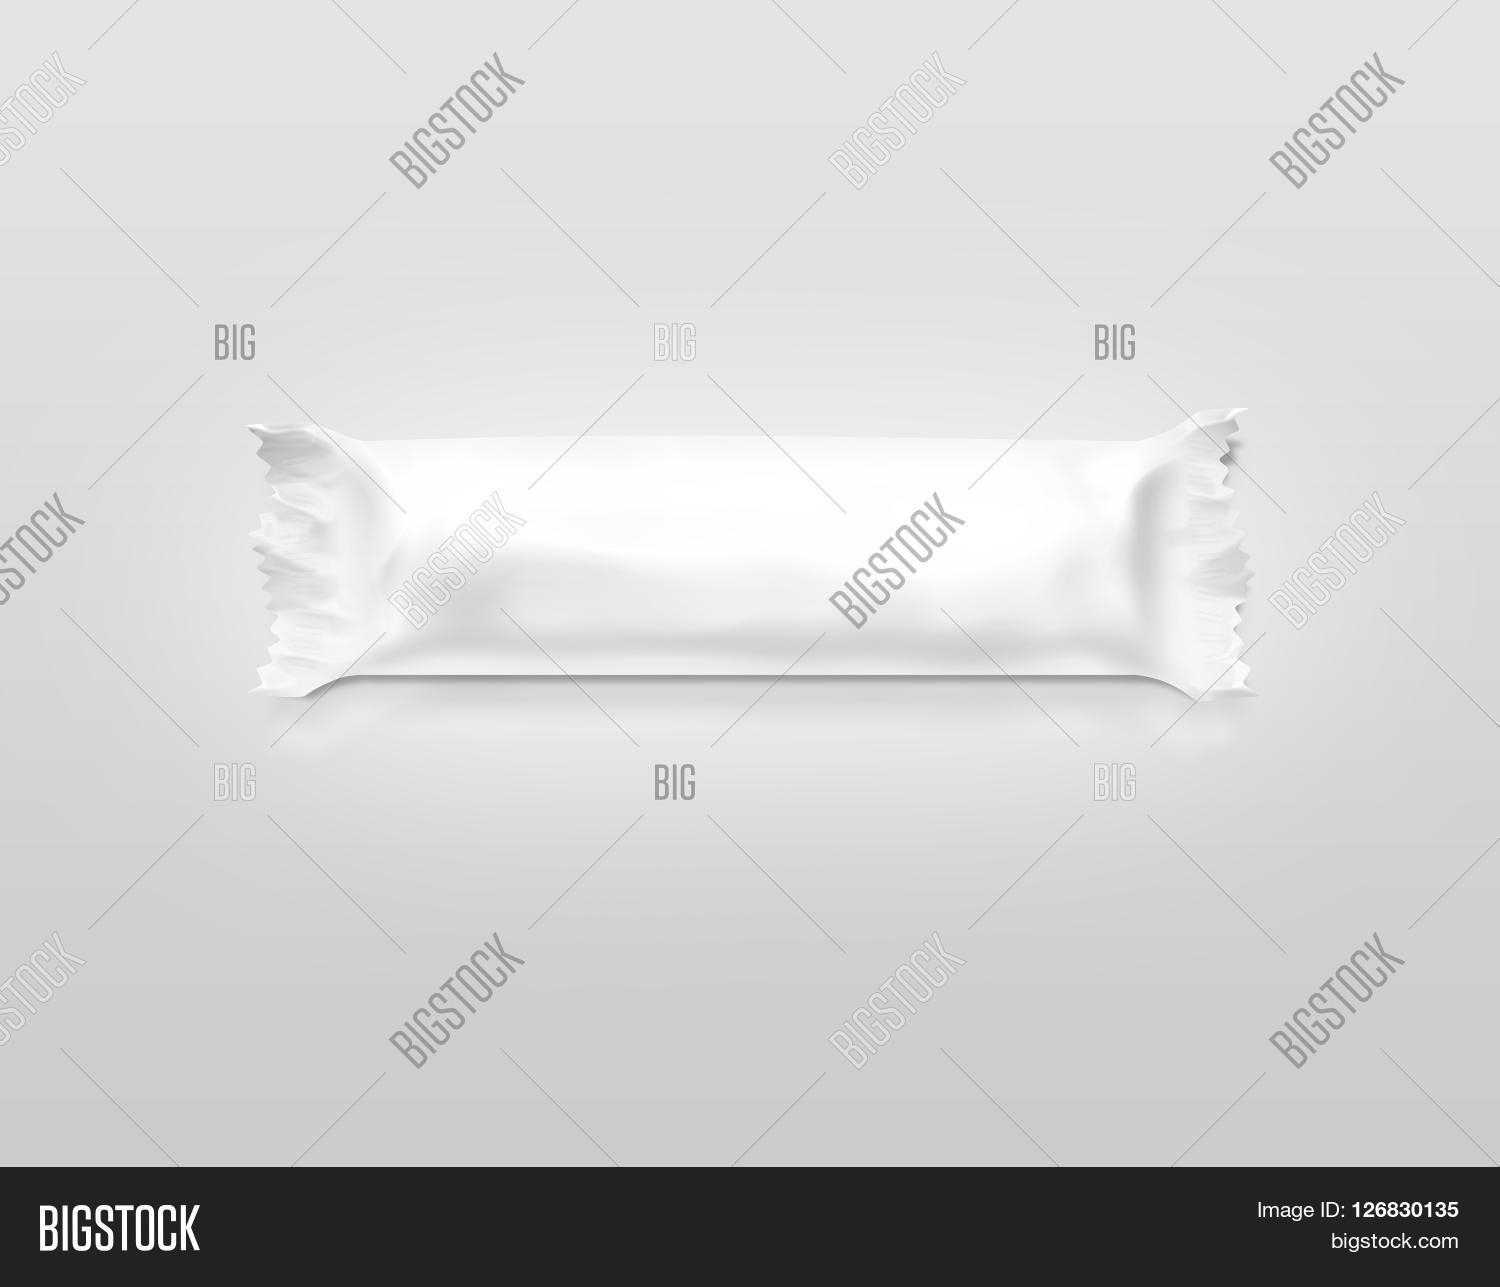 Blank White Candy Bar Image & Photo (Free Trial) | Bigstock Within Blank Candy Bar Wrapper Template